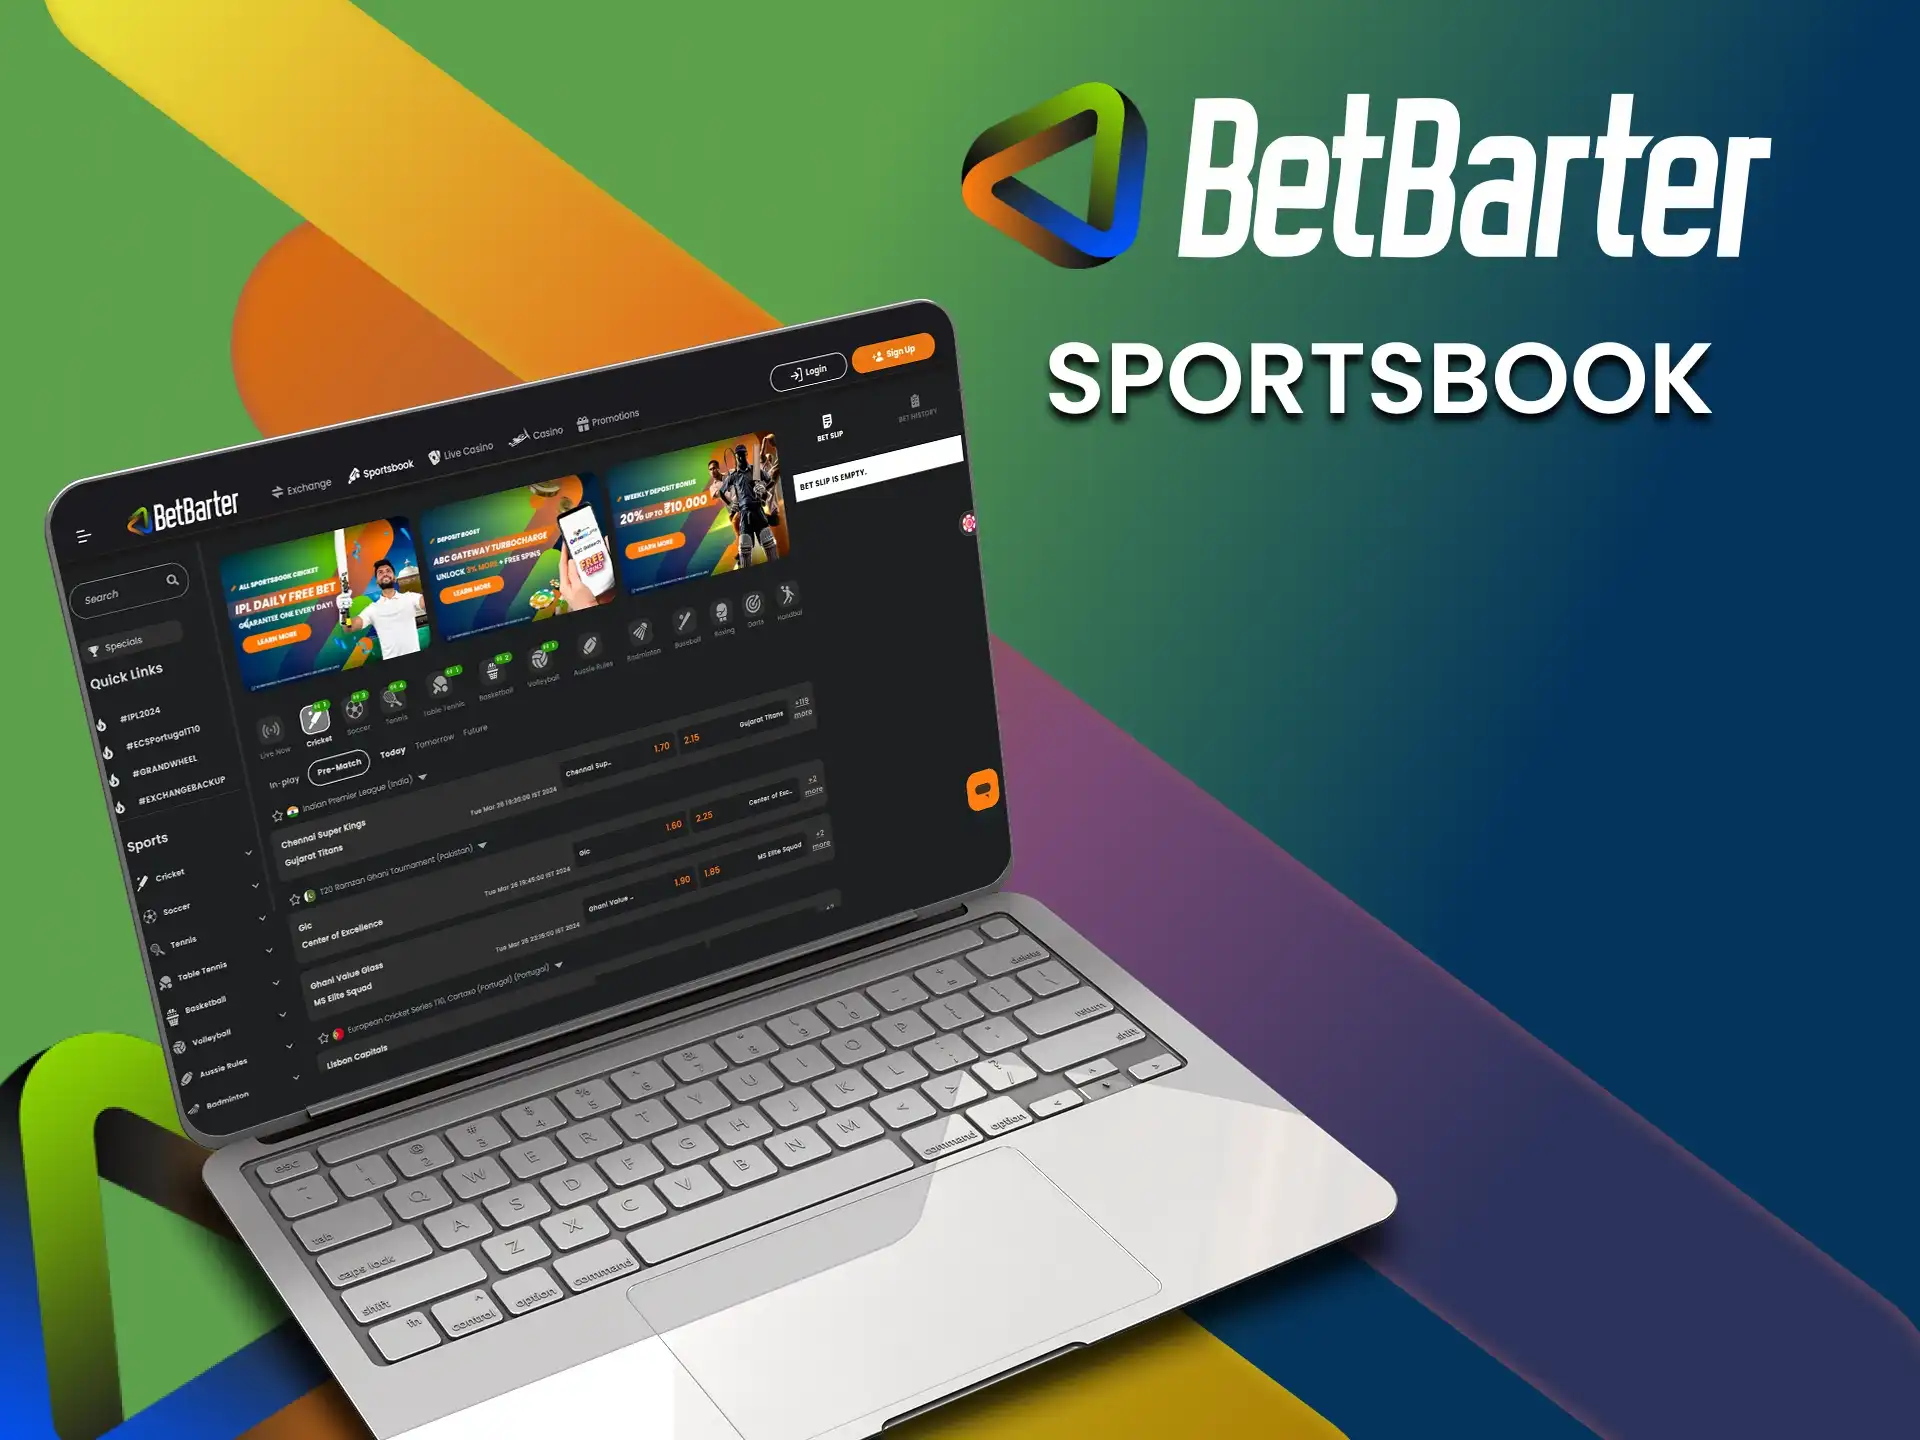 The main disciplines in this section of BetBarter online sportsbook are football and cricket which are very popular in India.